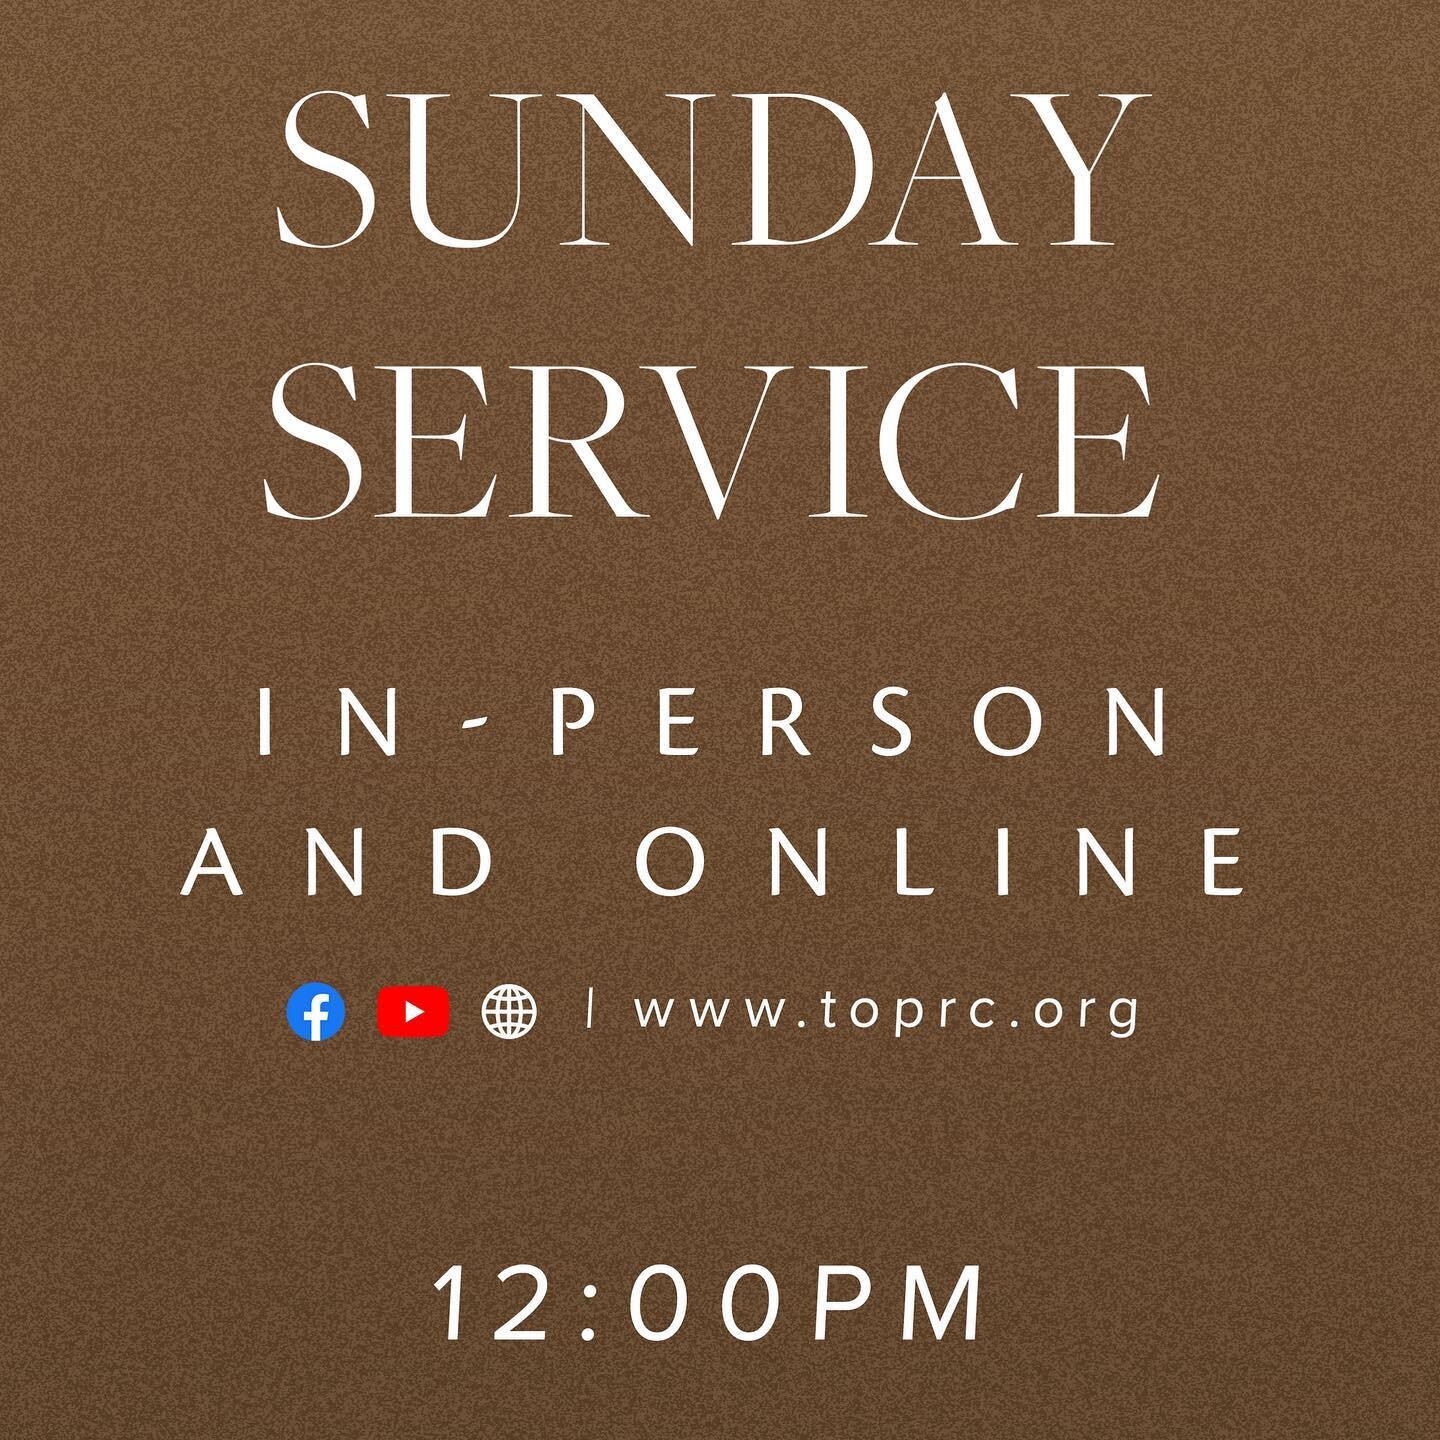 READY FOR CHURCH TOMORROW?!

We have reached our full capacity for our In-Person worship experience, but you can still join us online for Church Online!

Whether In-Person or Online, we can&rsquo;t wait to see you all tomorrow at 12pm.

#thetabernacl